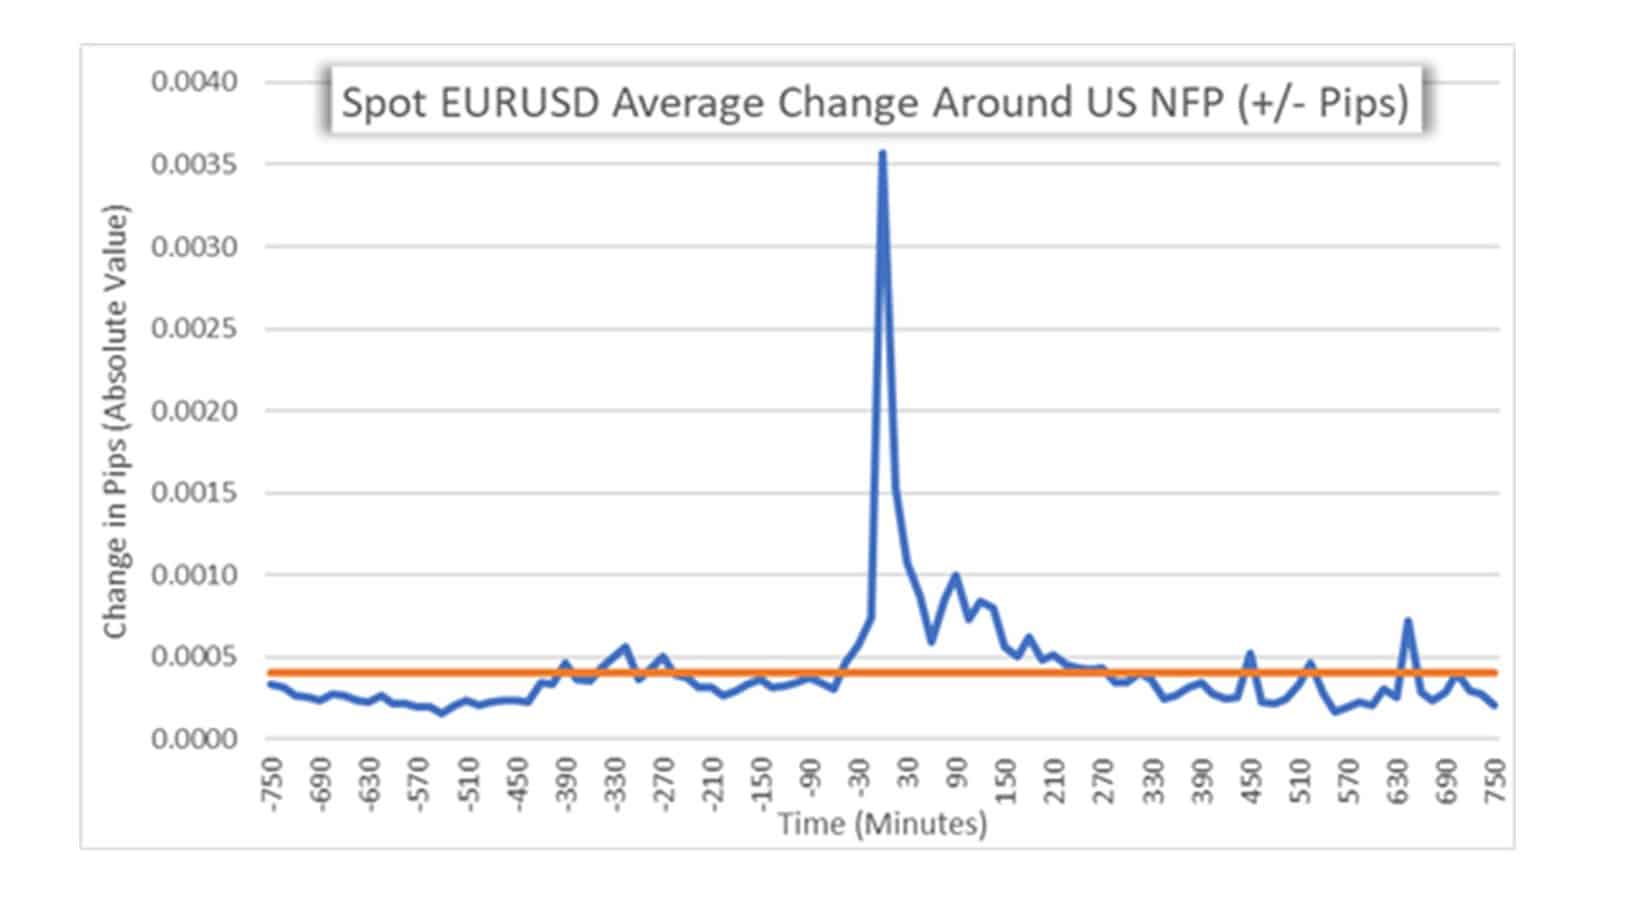 NFP change in pips